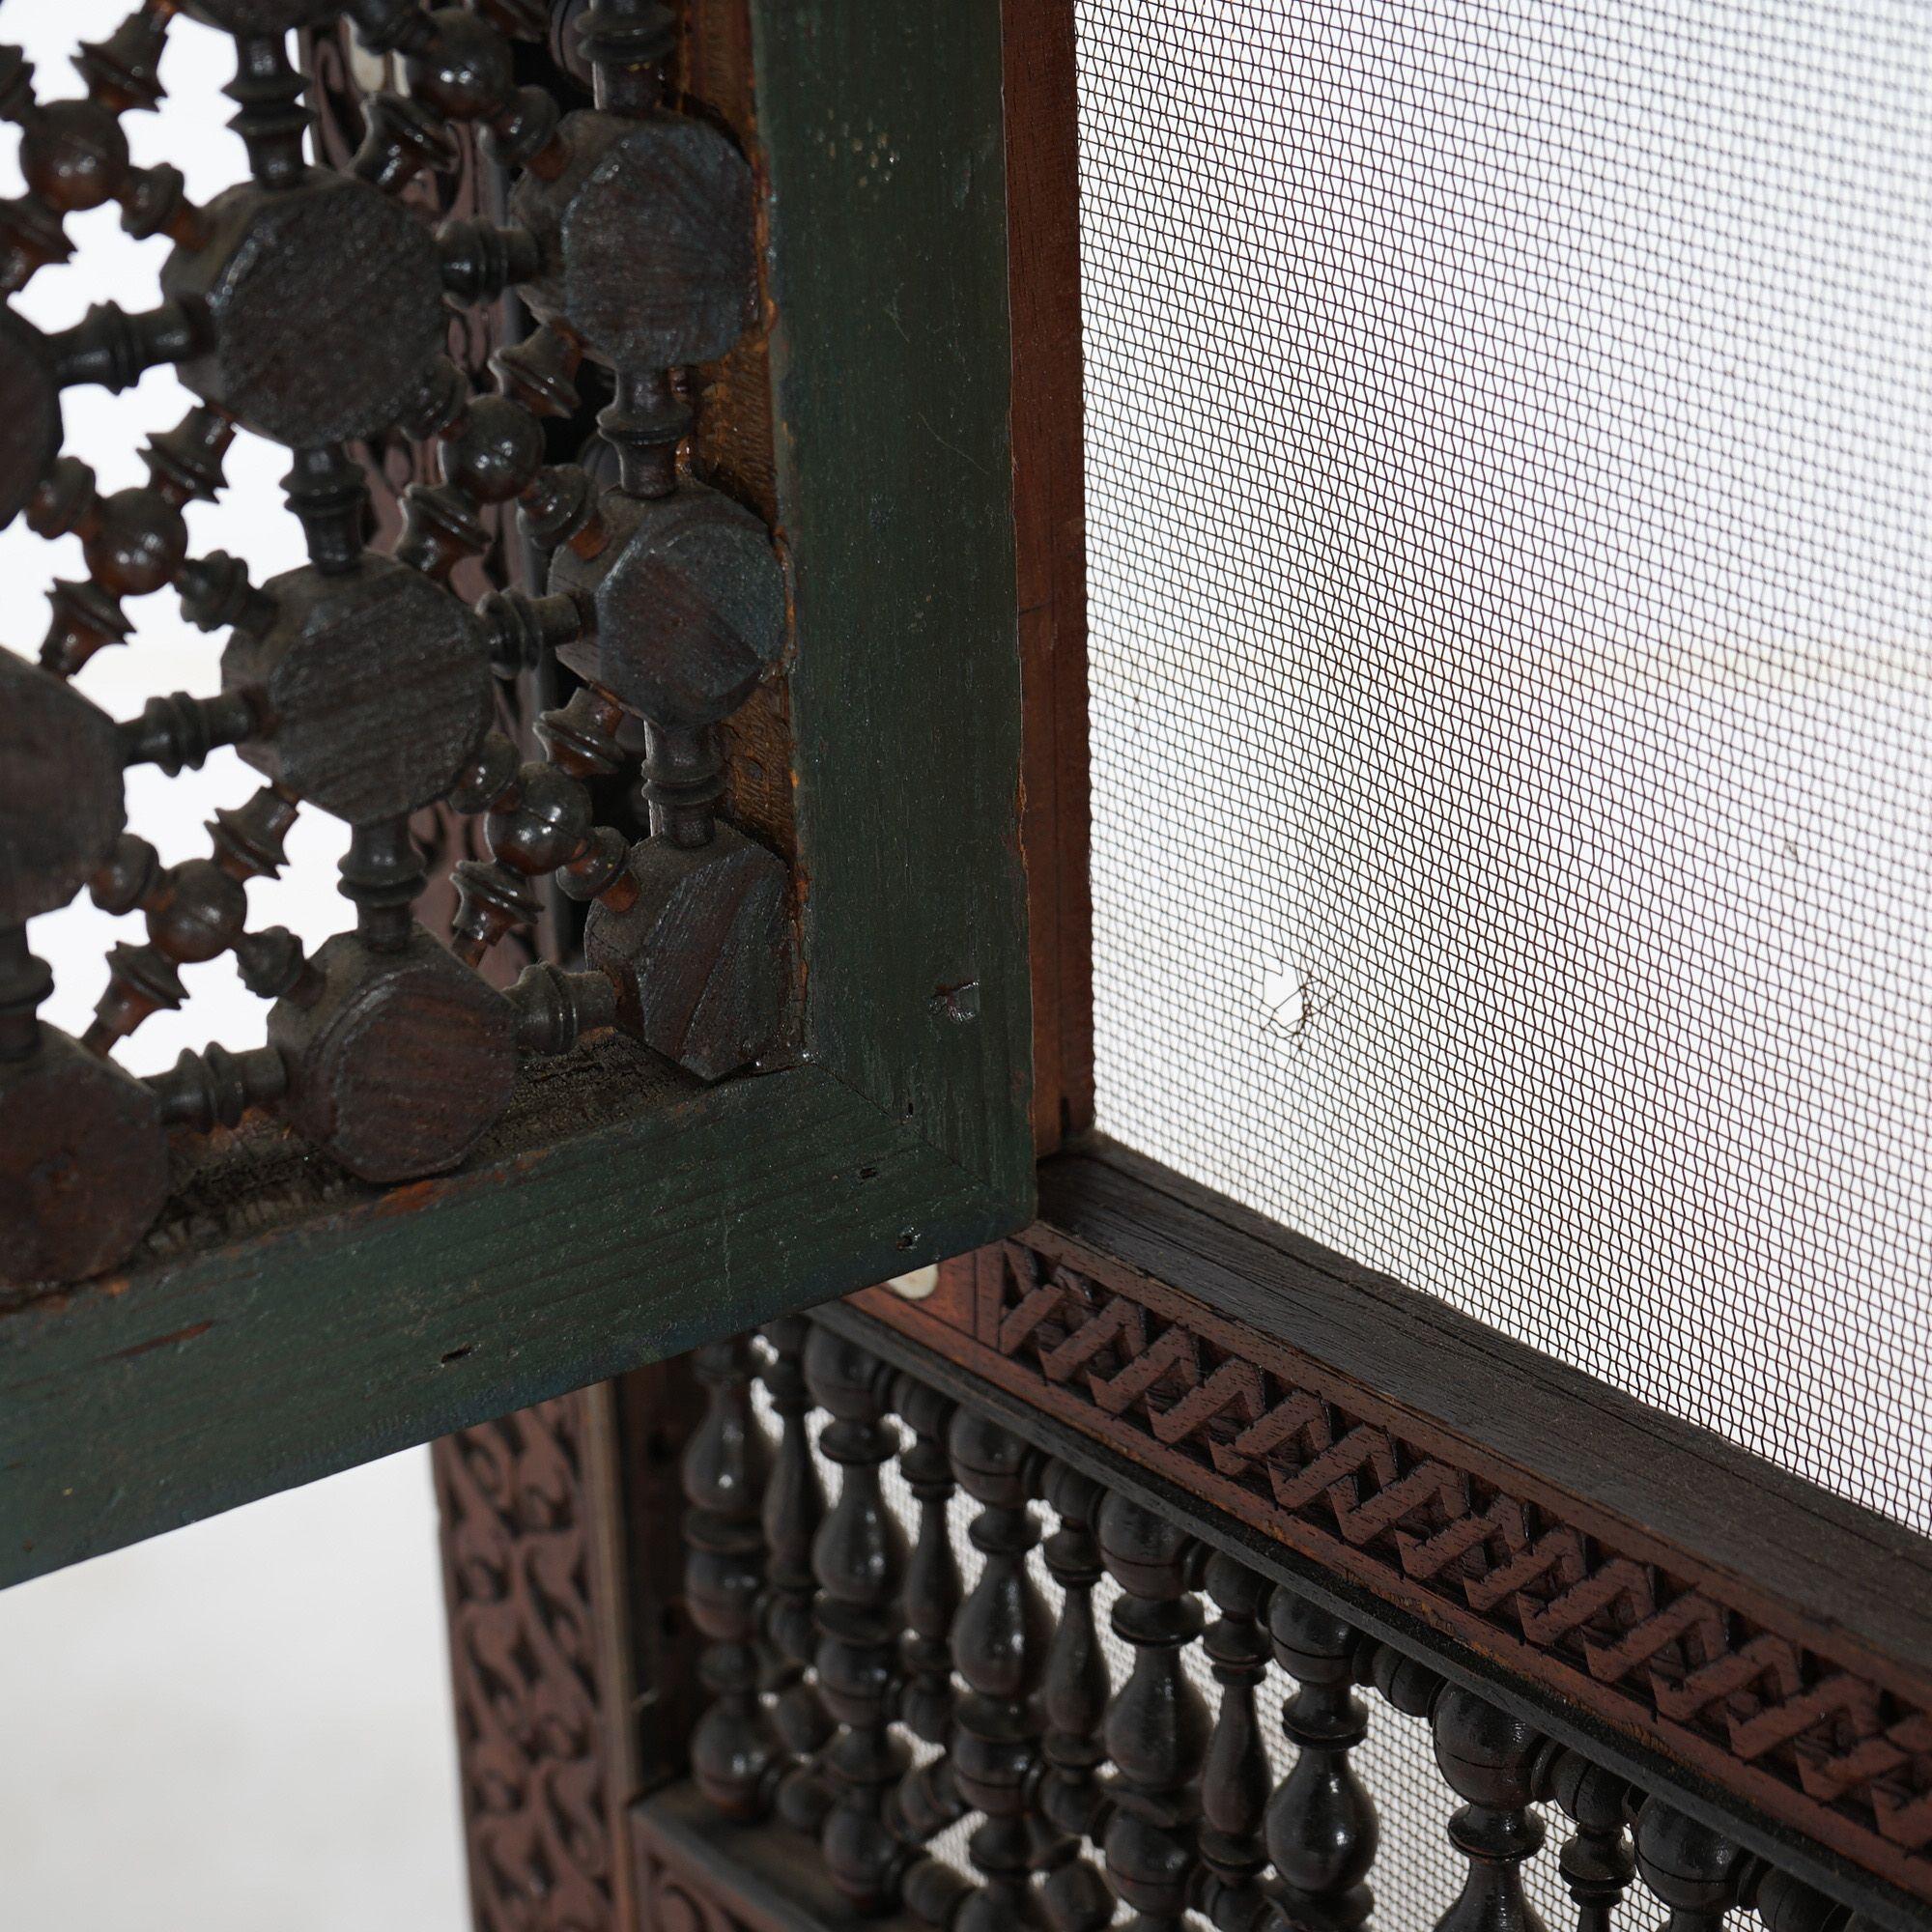 Mother-of-Pearl Antique Syrian Carved Hardwood & Mother of Pearl Screen with Crescent Moon 19thC